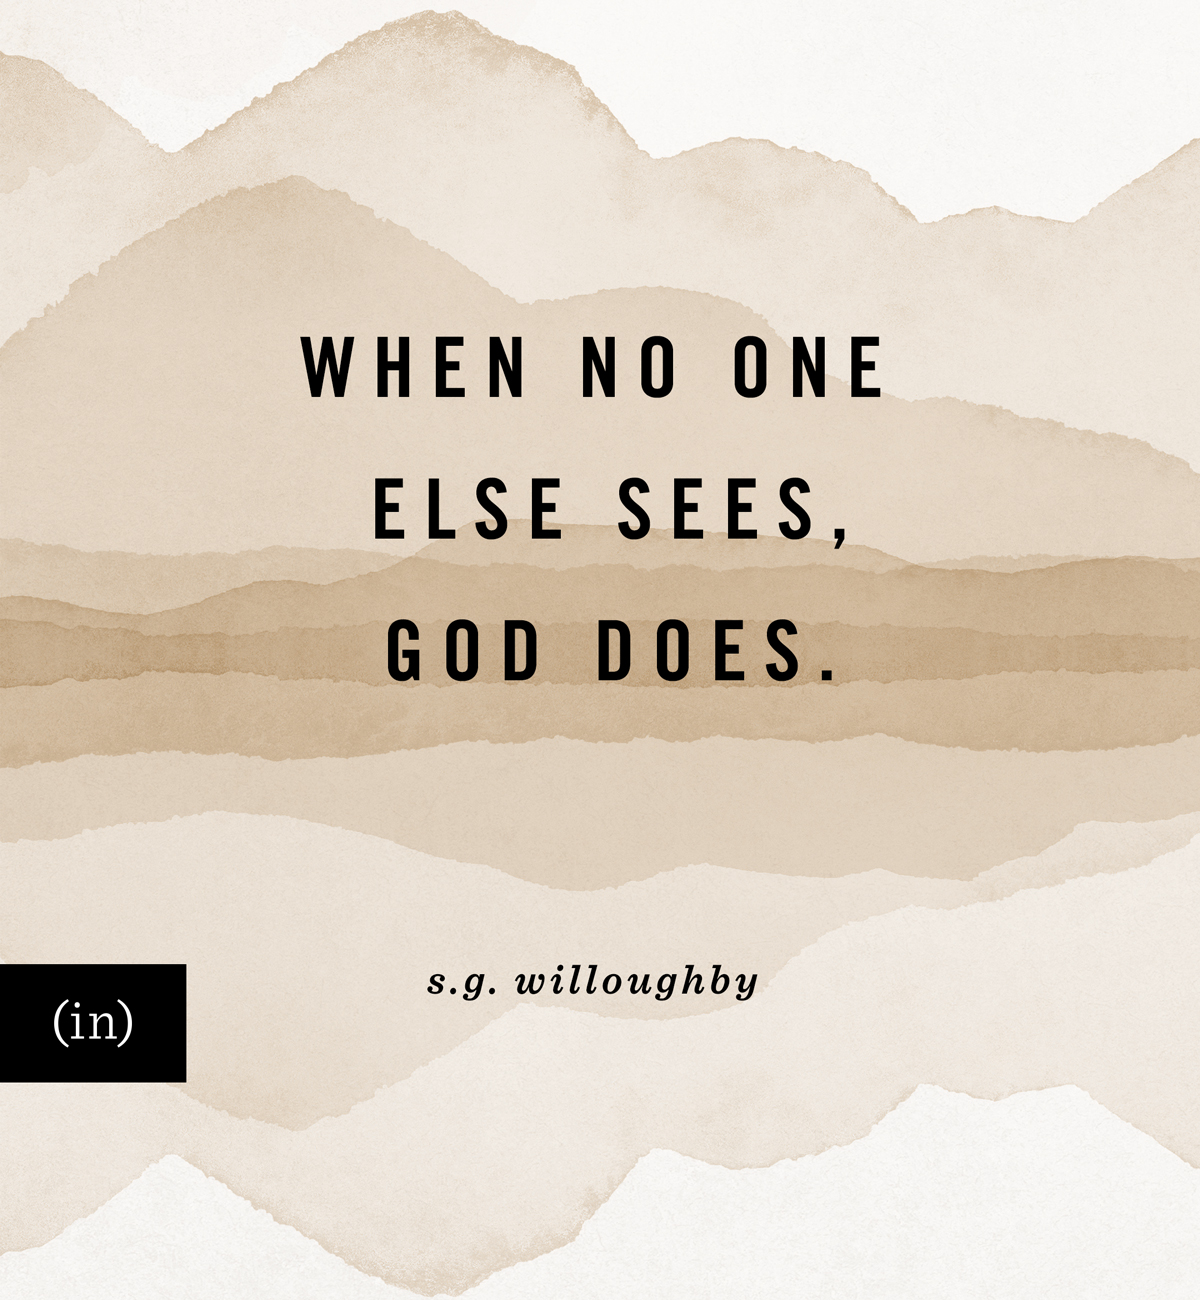 When no one else sees, God does. -S.G. Willoughby